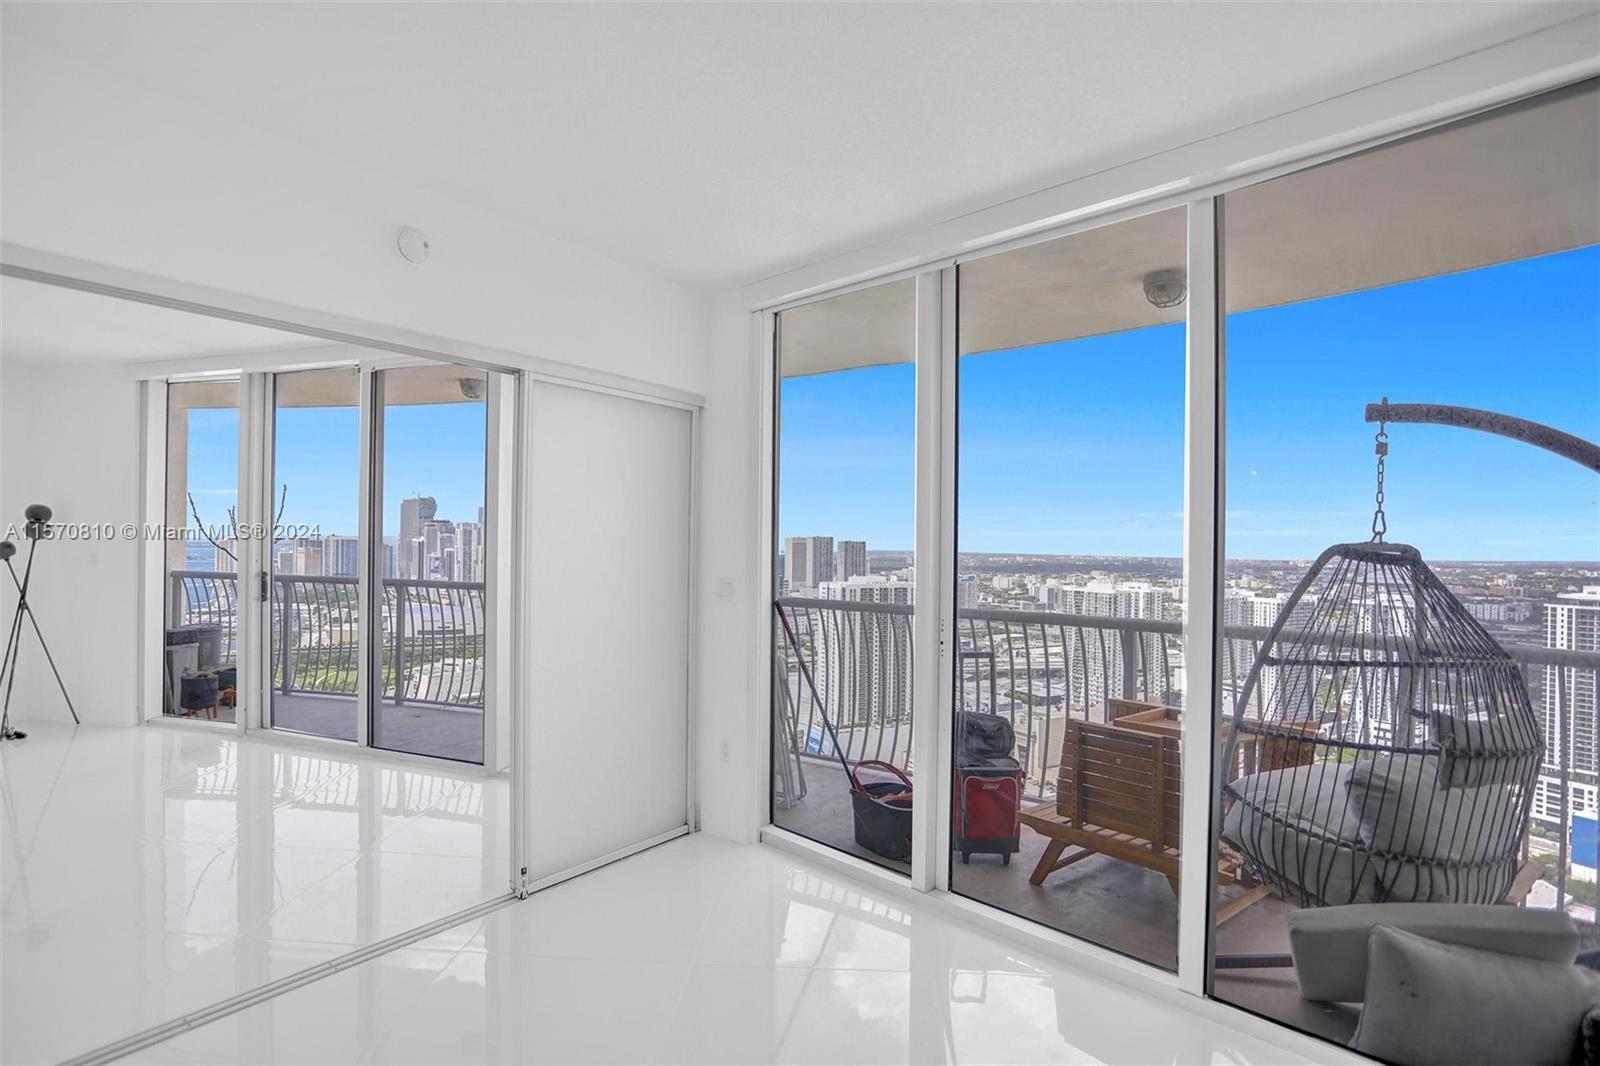 This 2 Bed / 2 Bathroom Turn-Key Ready & Fully Upgrade Unit is looking for new tenants, This Unit is One of 4 Penthouses at The Opera Towers, Located on the 52nd floor offering one of the Largest Balconies with a spectacular view, this unit also includes Stainless Steel Appliances with a New Smart Refrigerator, Freshly Painted all White, Brand New & Fully Remodeled Kitchen, Bathrooms & floors from Top to Bottom, remote control Blinds and so much more... Building Amenities includes: Pool, Gym, Clubroom, Lobby Convenience Store & Valet. Centrally located and right across from Margaret Pace Park, you also have easy access to DownTown, Brickell, Wynwood, and the Design District. Hurry Will Not Last